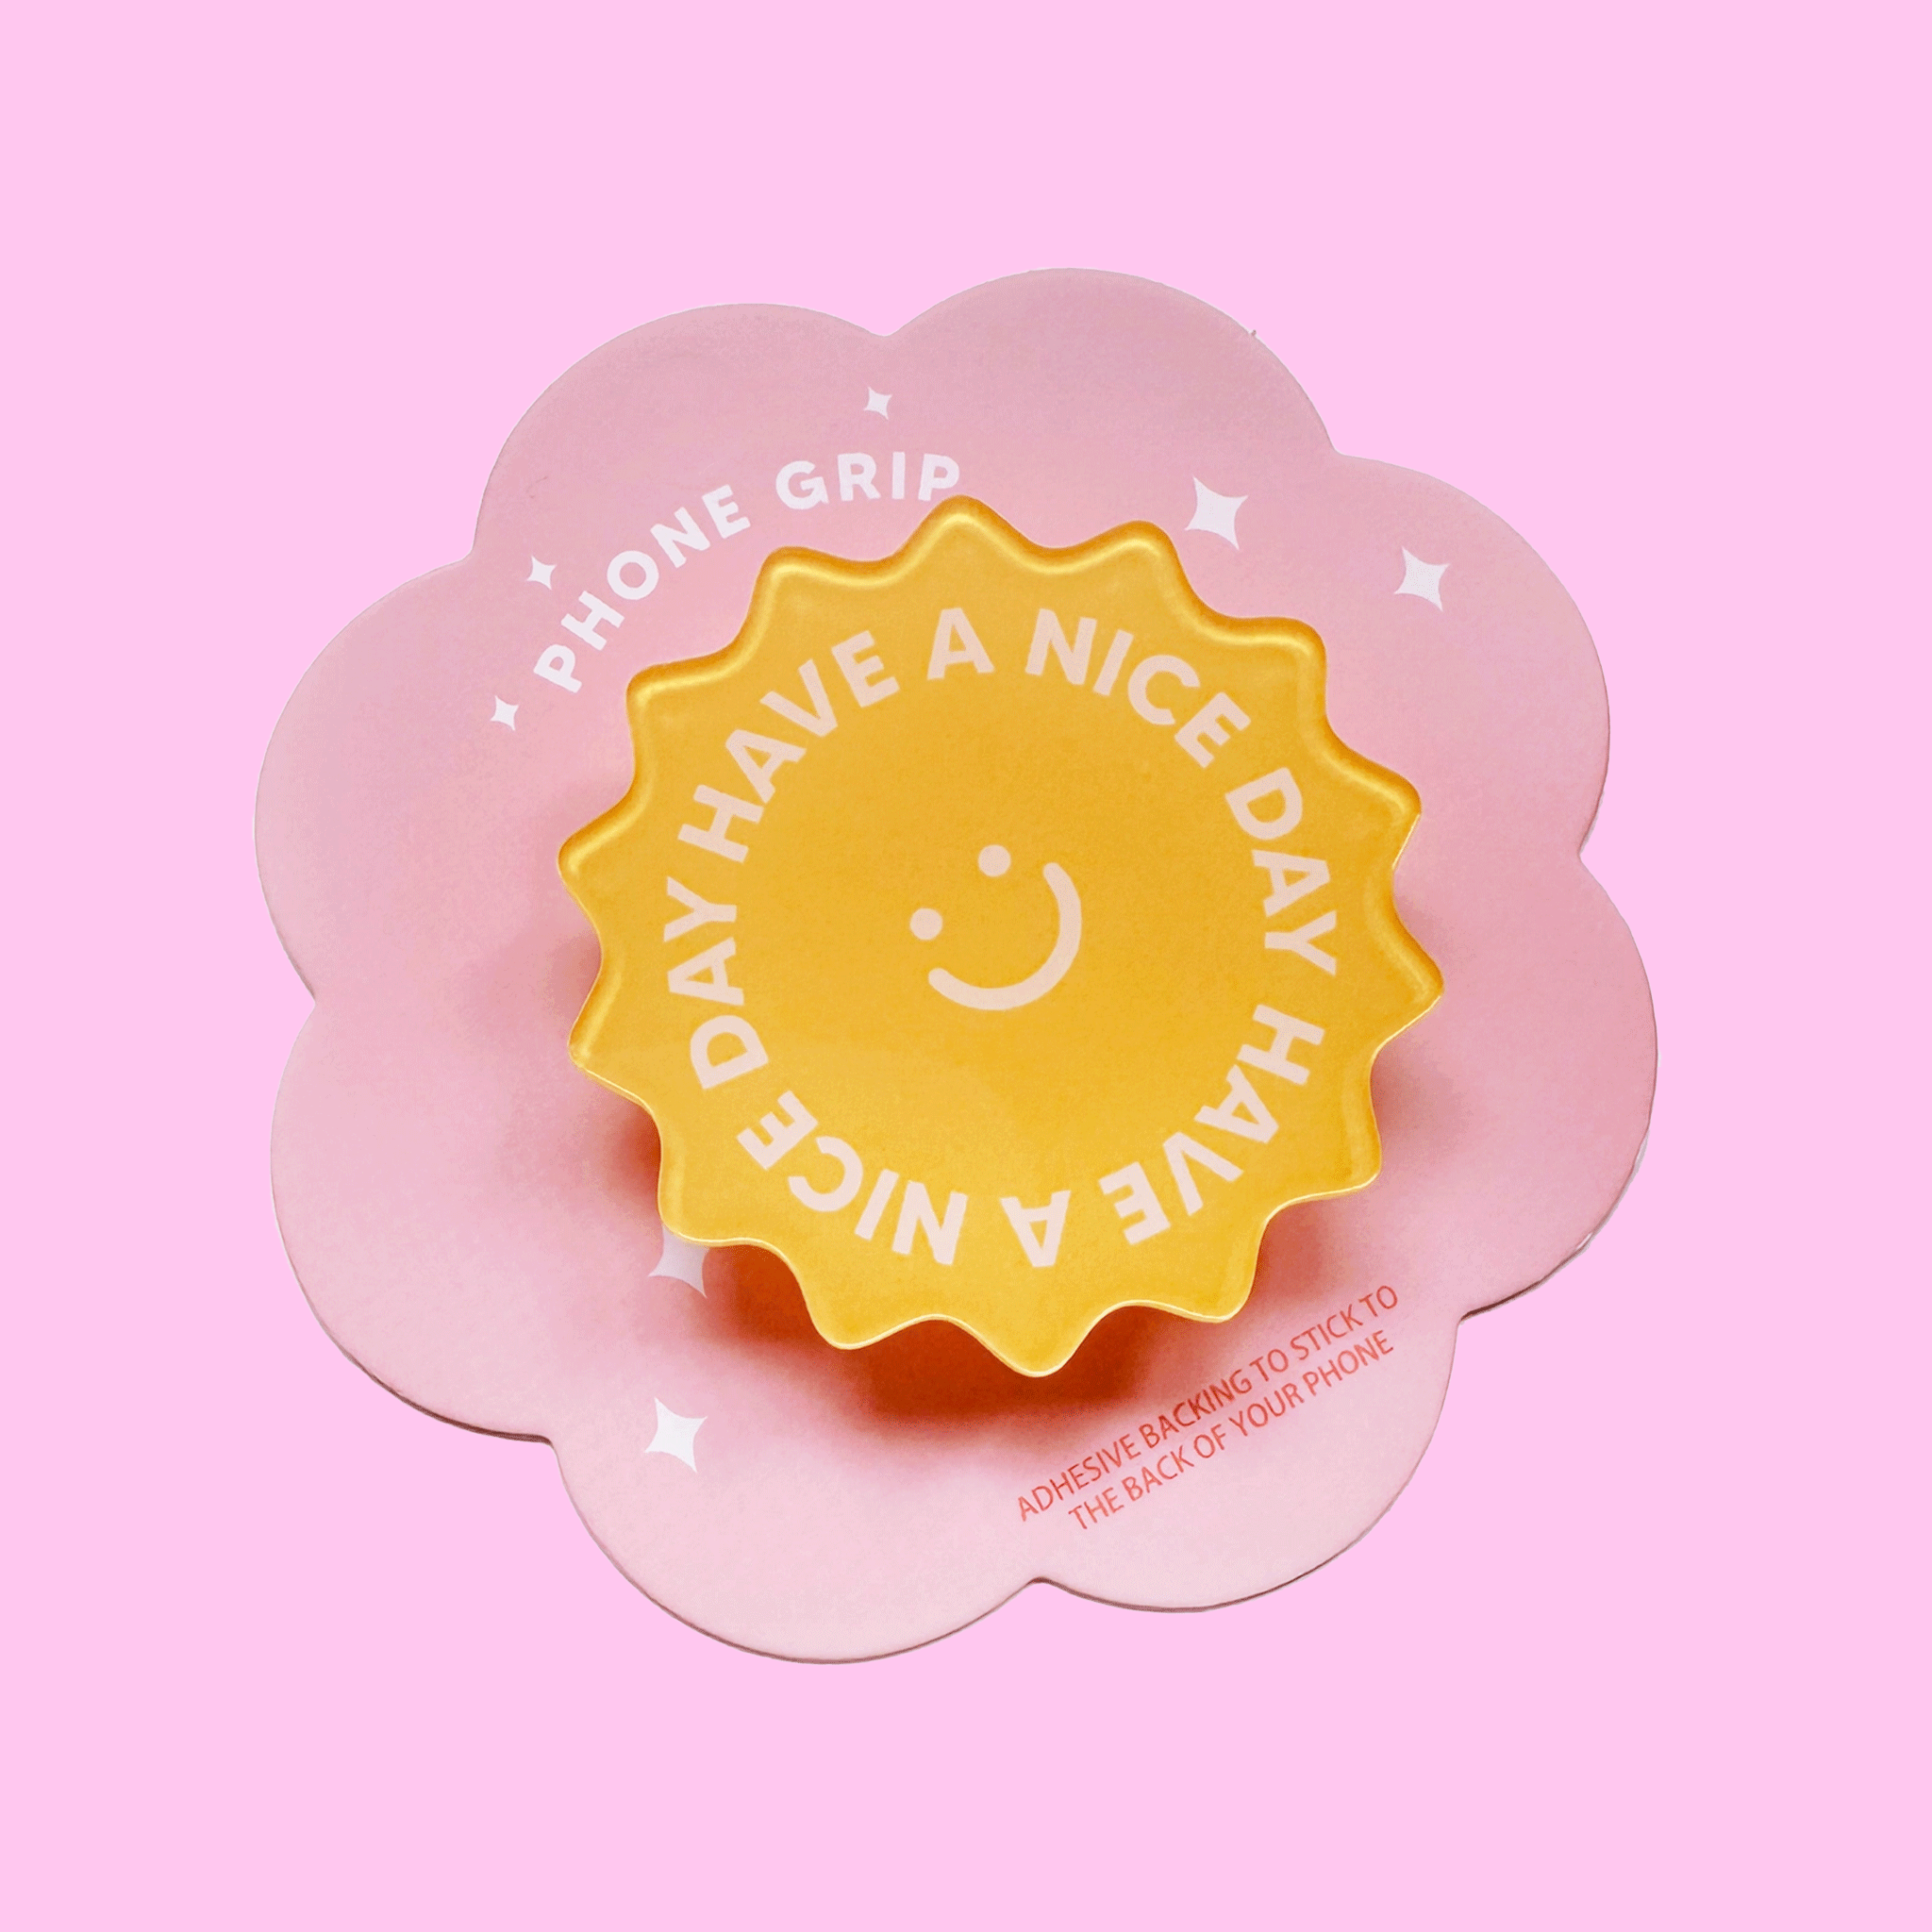 On a pink background is a yellow sun shaped phone grip with text on it that reads, "Have A Nice Day Have A Nice Day".